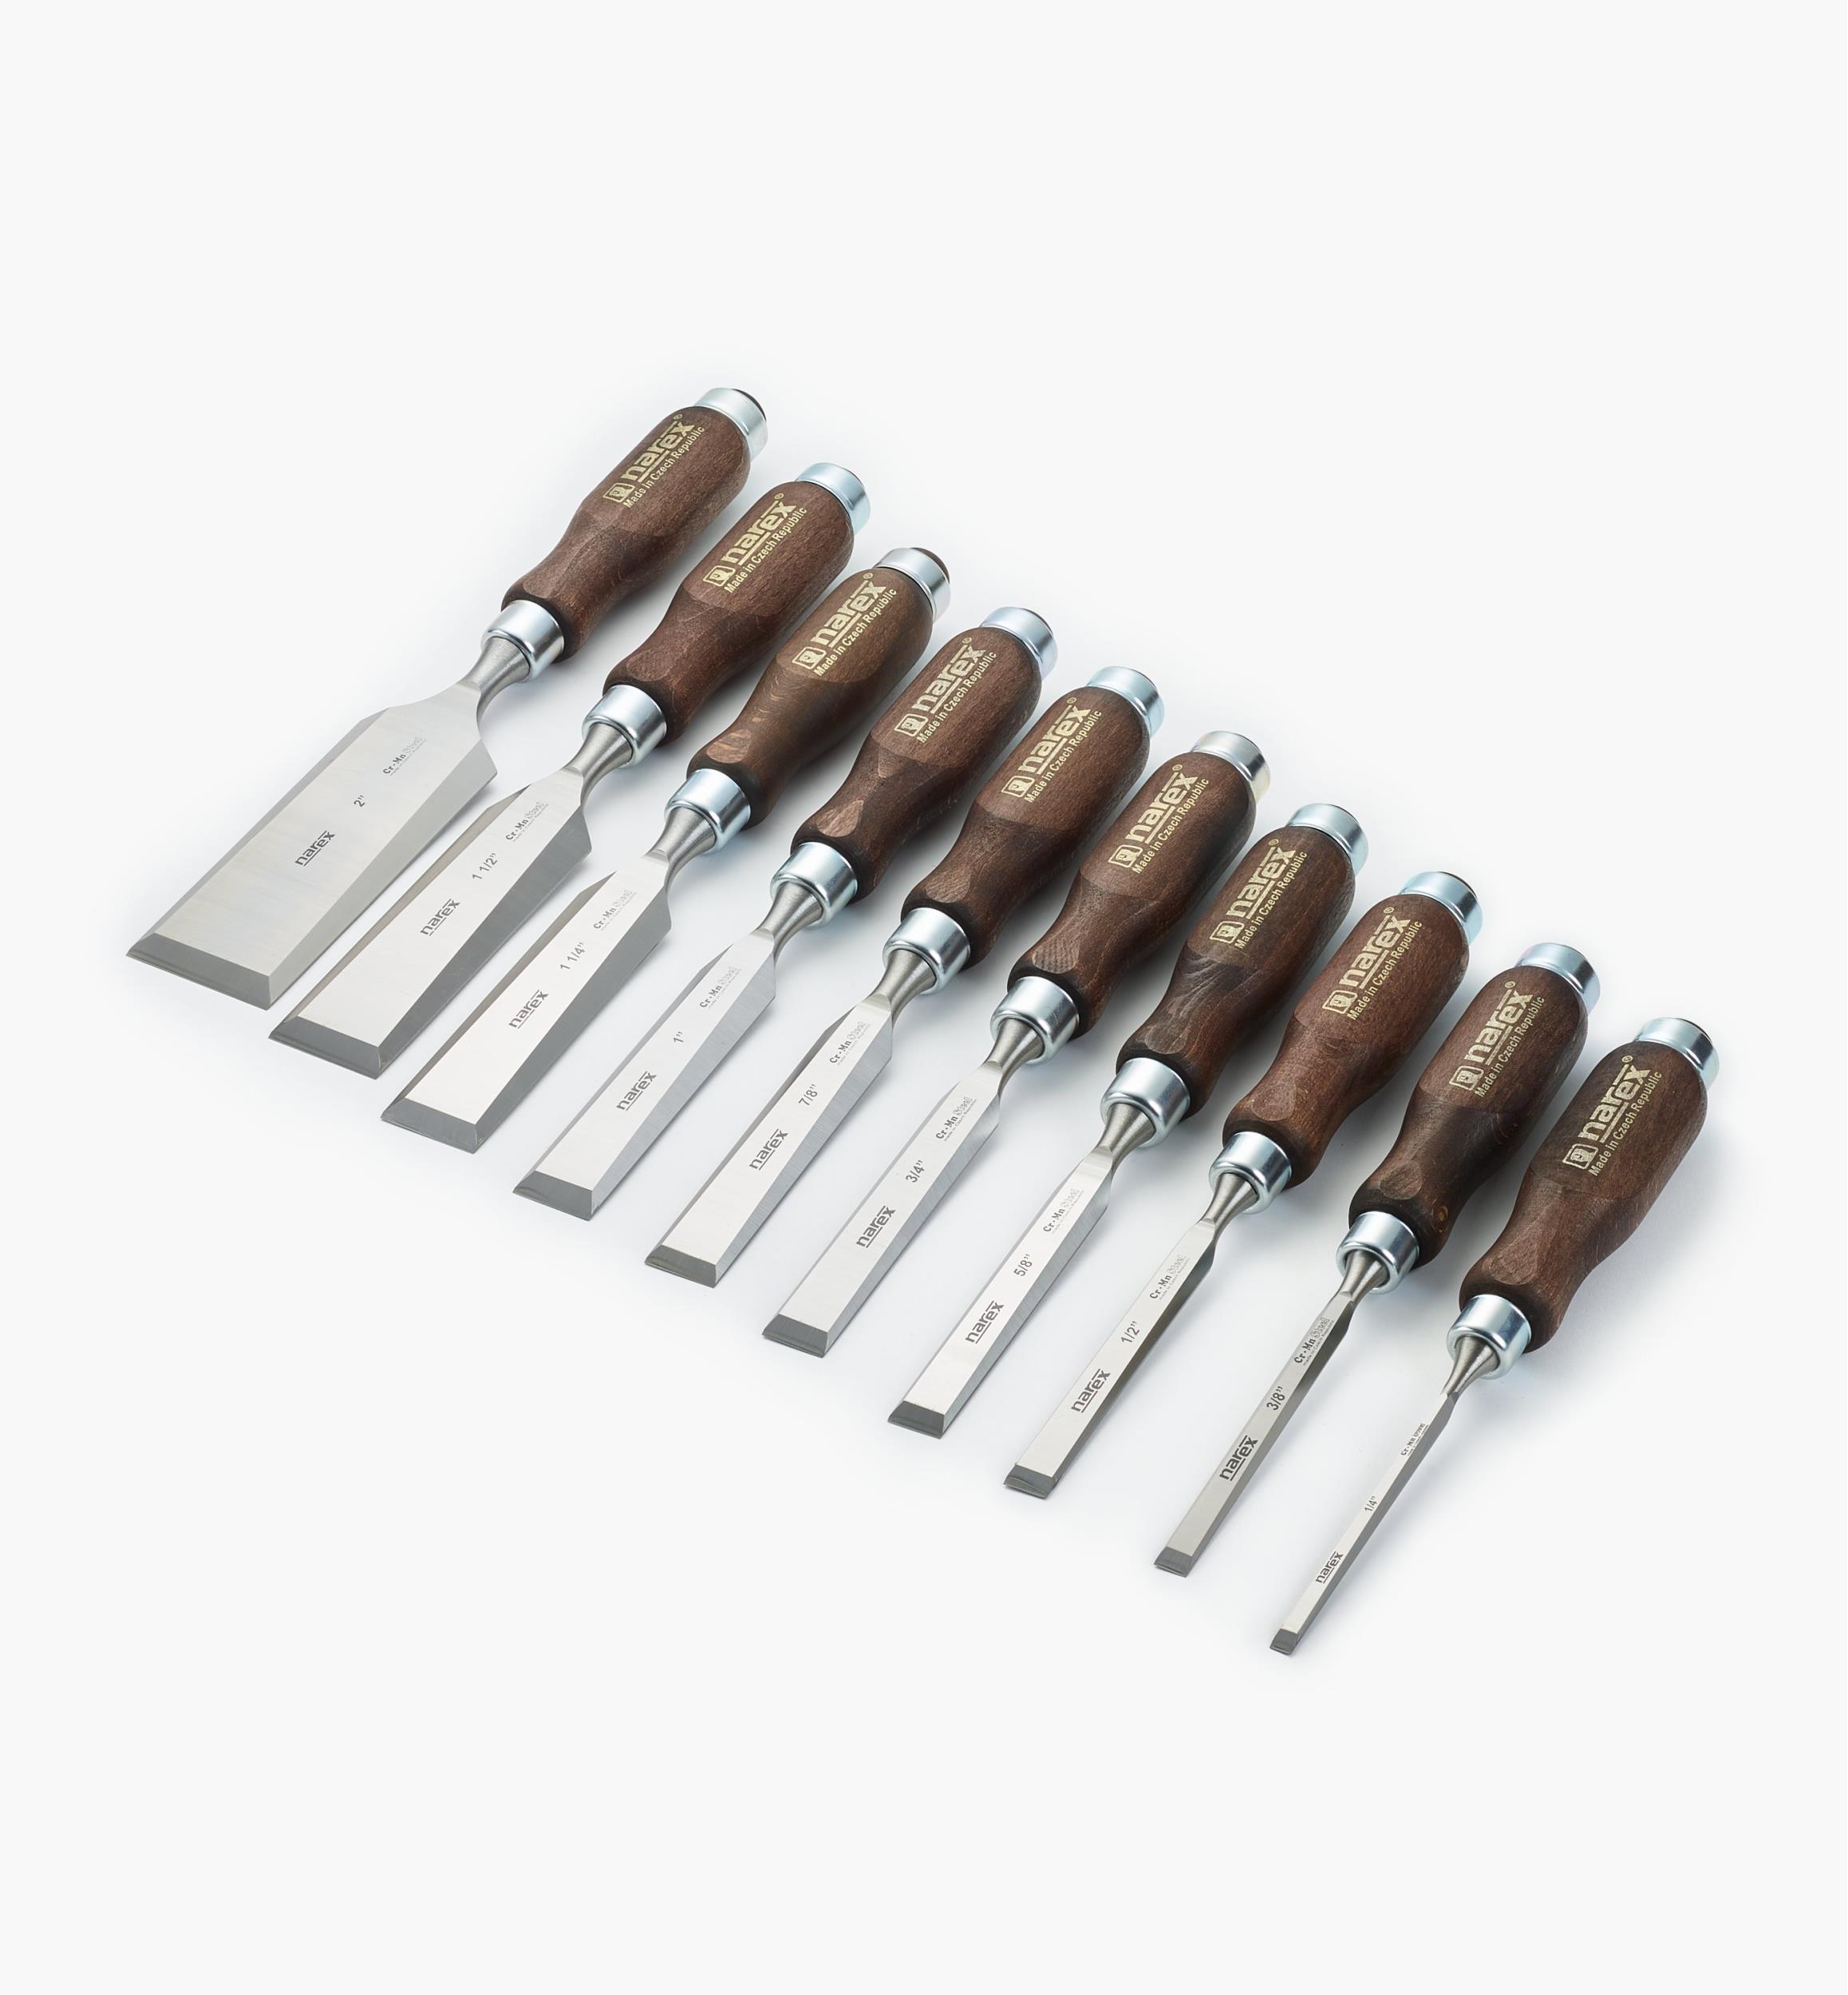 Narex Classic Bevel-Edge Chisels - Lee Valley Tools